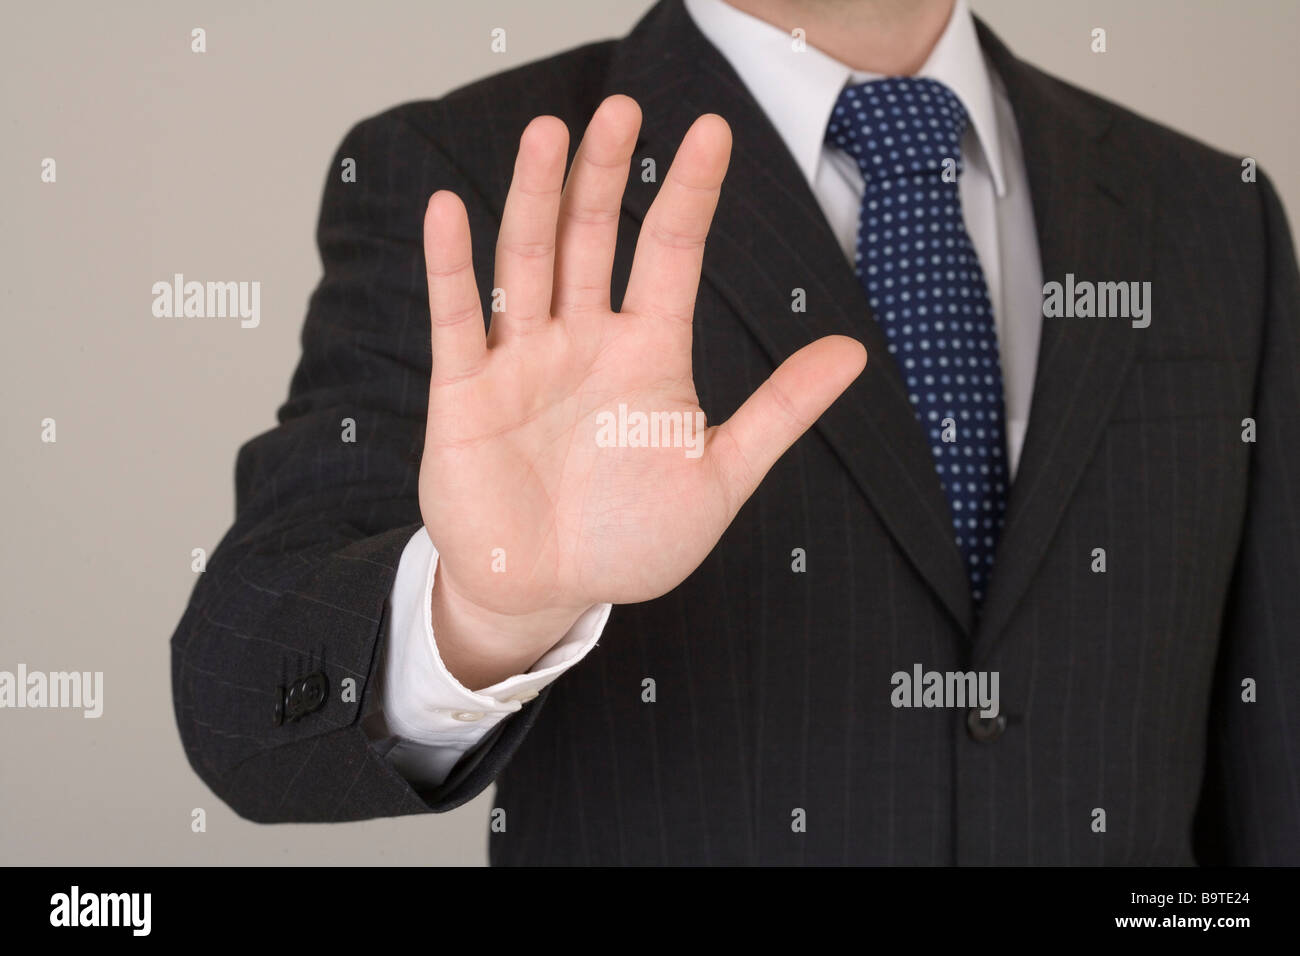 Businessman with self defending gesture Stock Photo